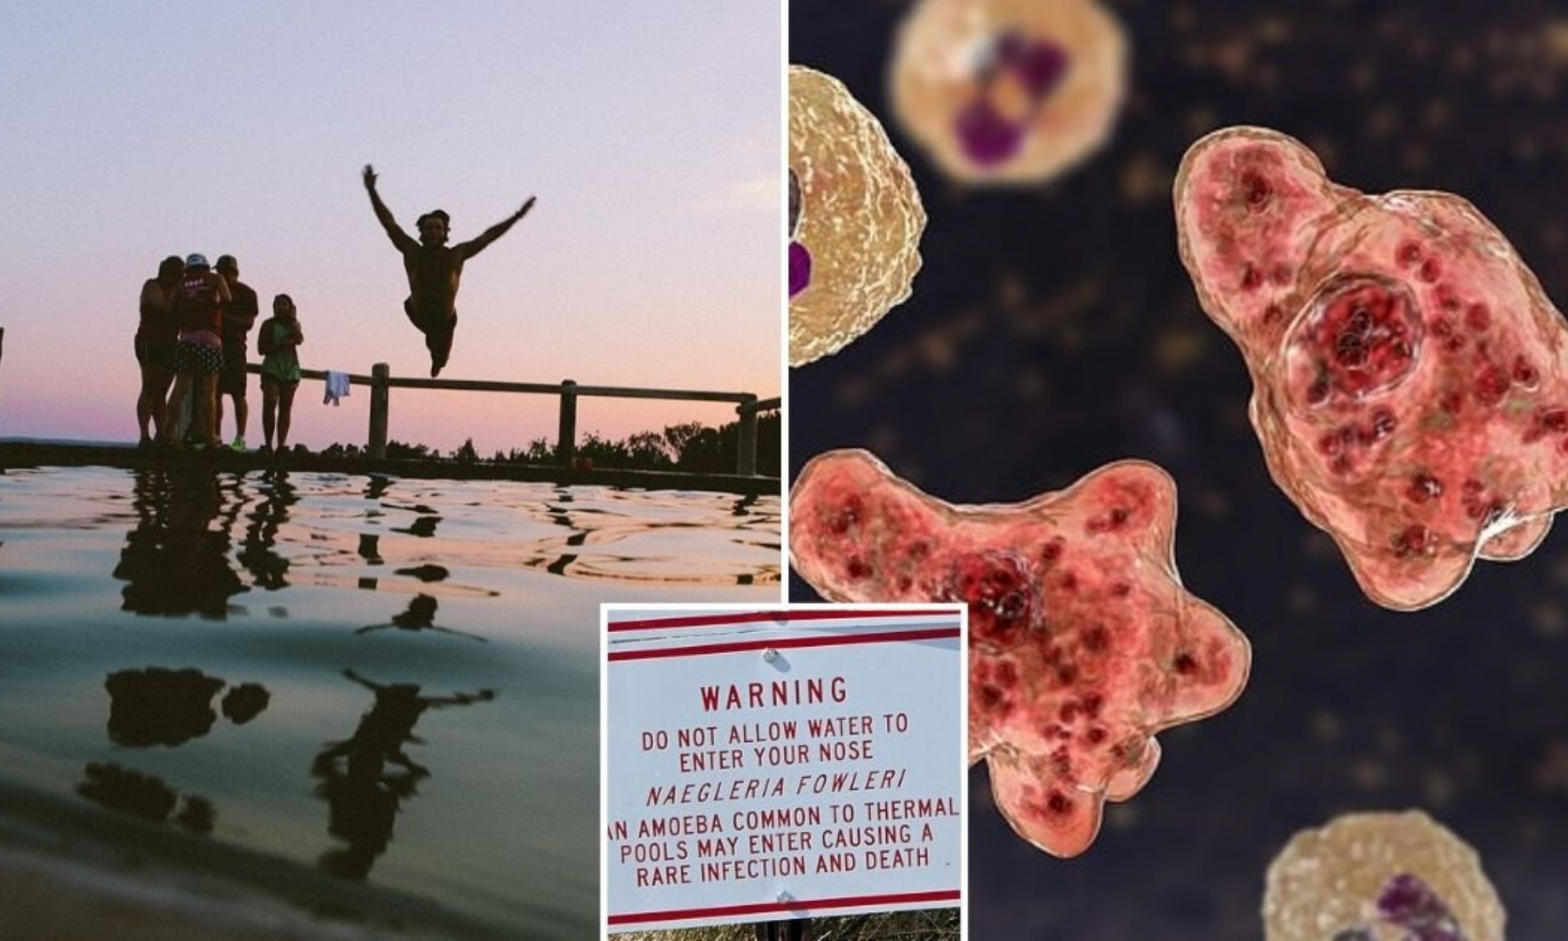 Brain-eating amoeba infection reported in South Korea